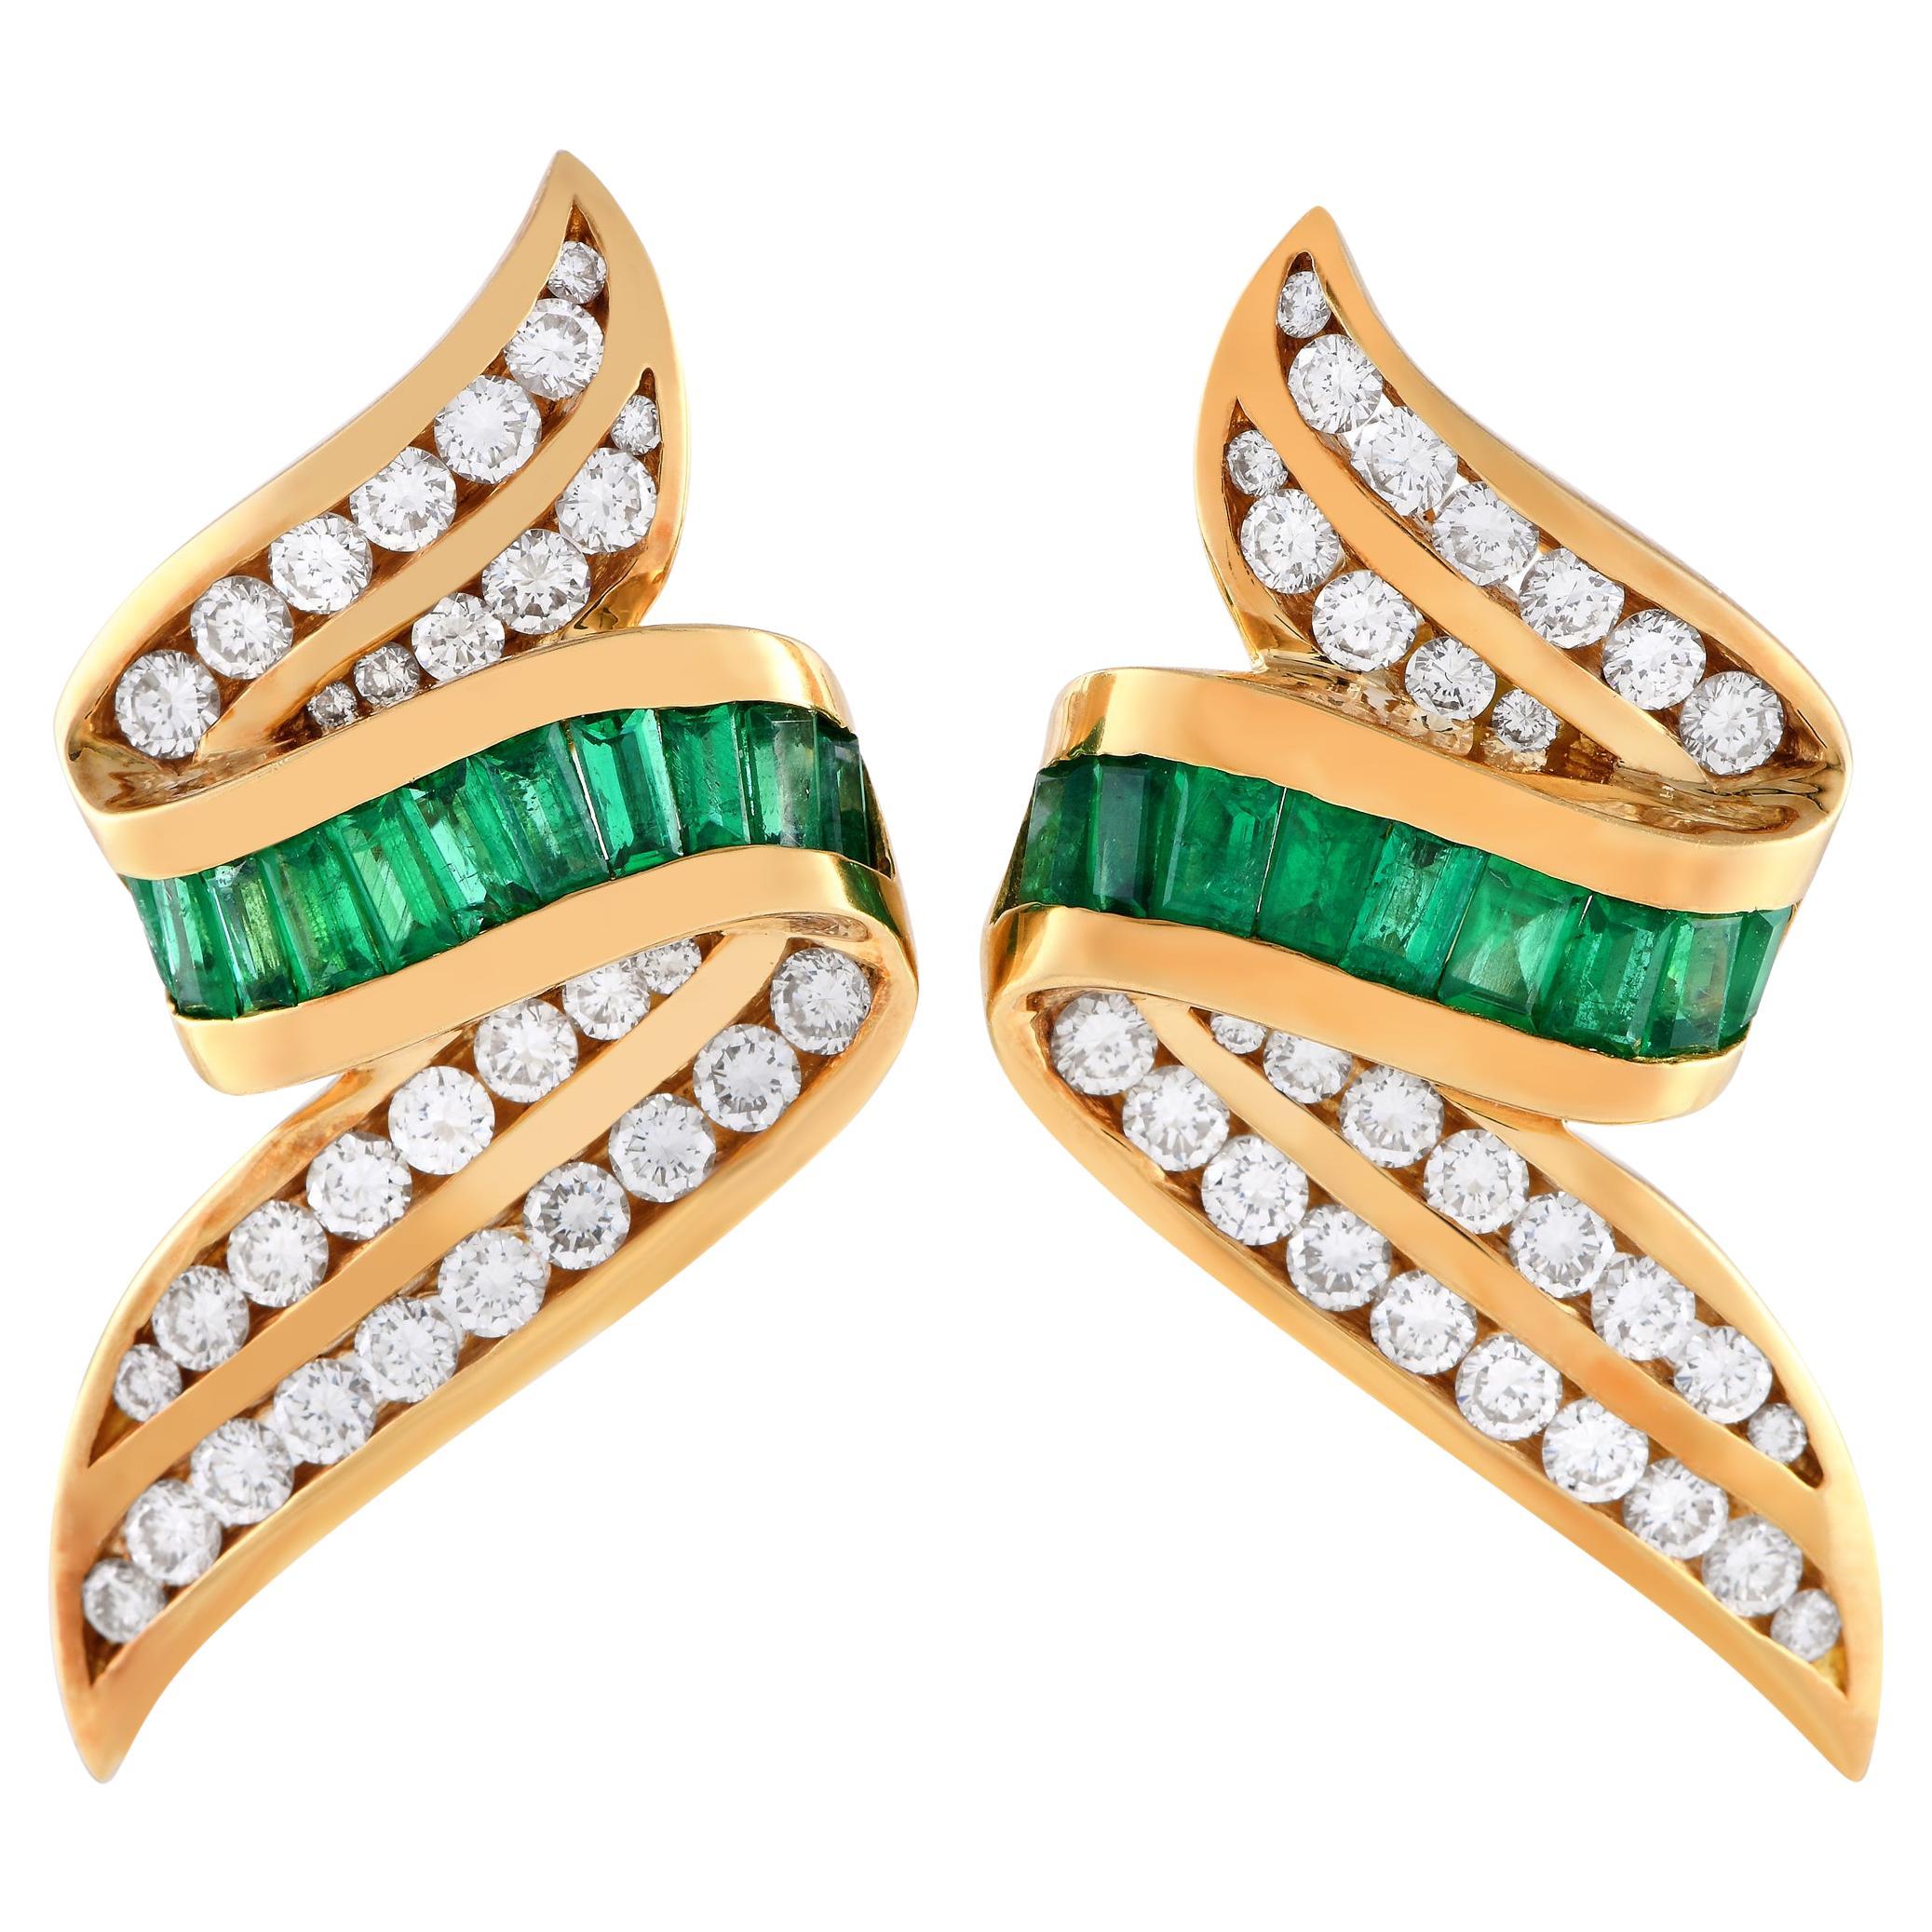 Charles Krypell 18k Yellow Gold 2.50 Carat Diamond and Emerald Earrings For Sale